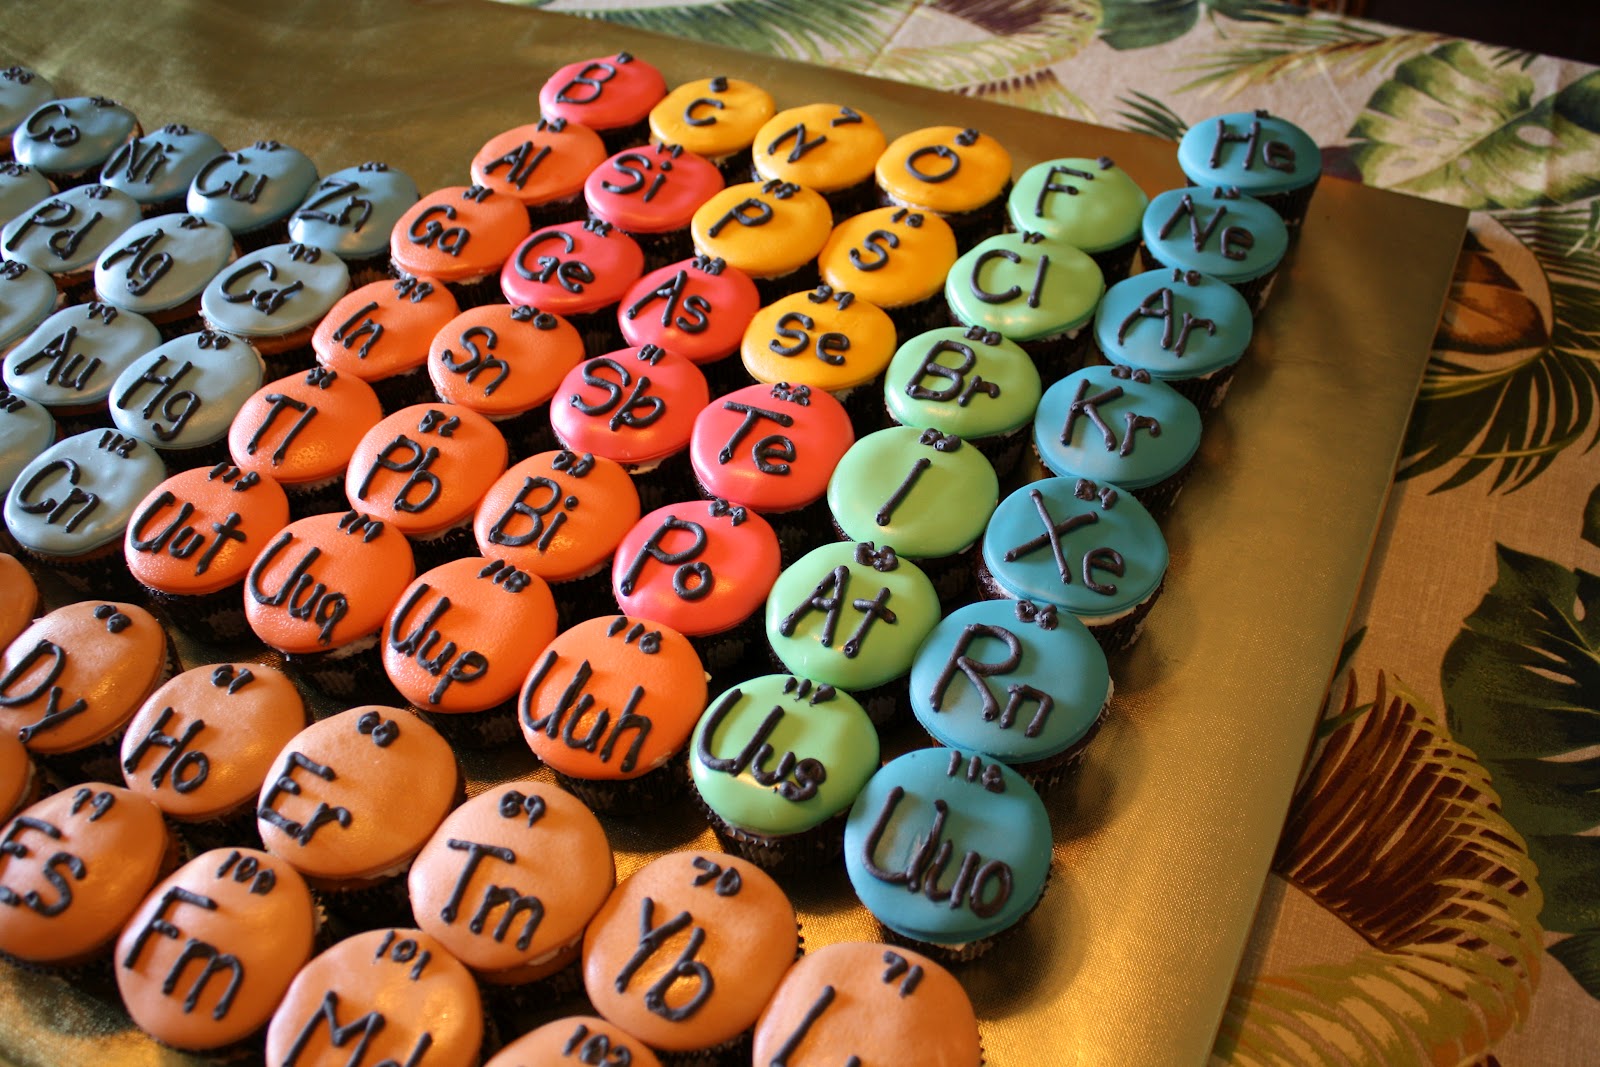 STEM and cupcakes together